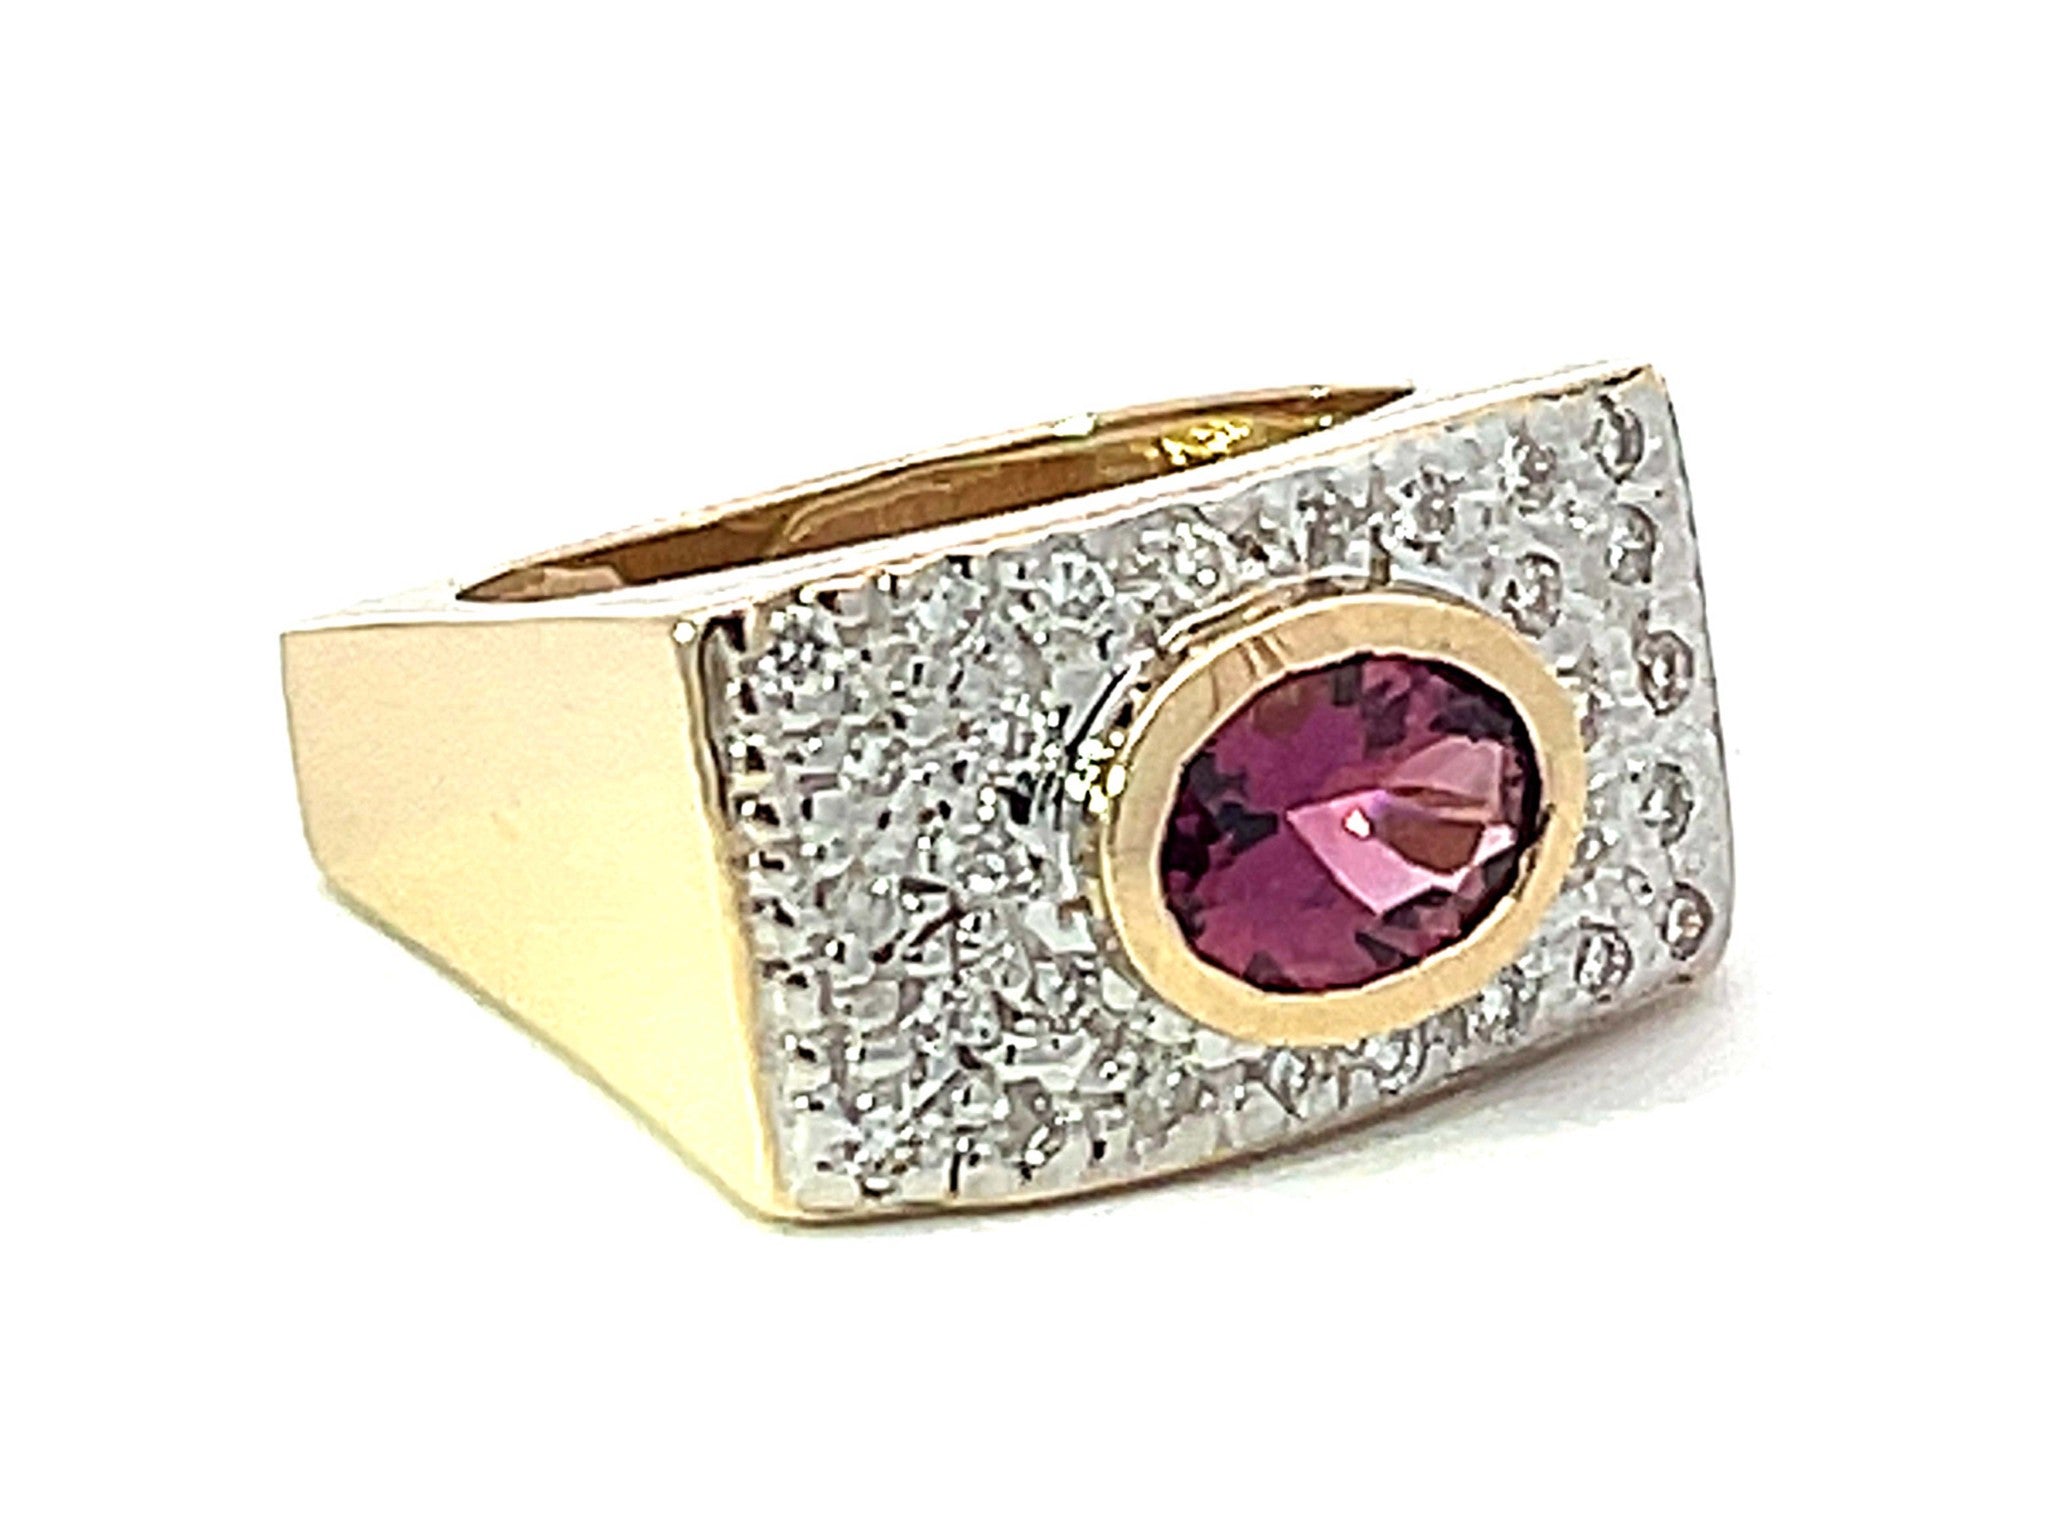 Pink Tourmaline and Diamond Wide Ring in 14k Yellow Gold